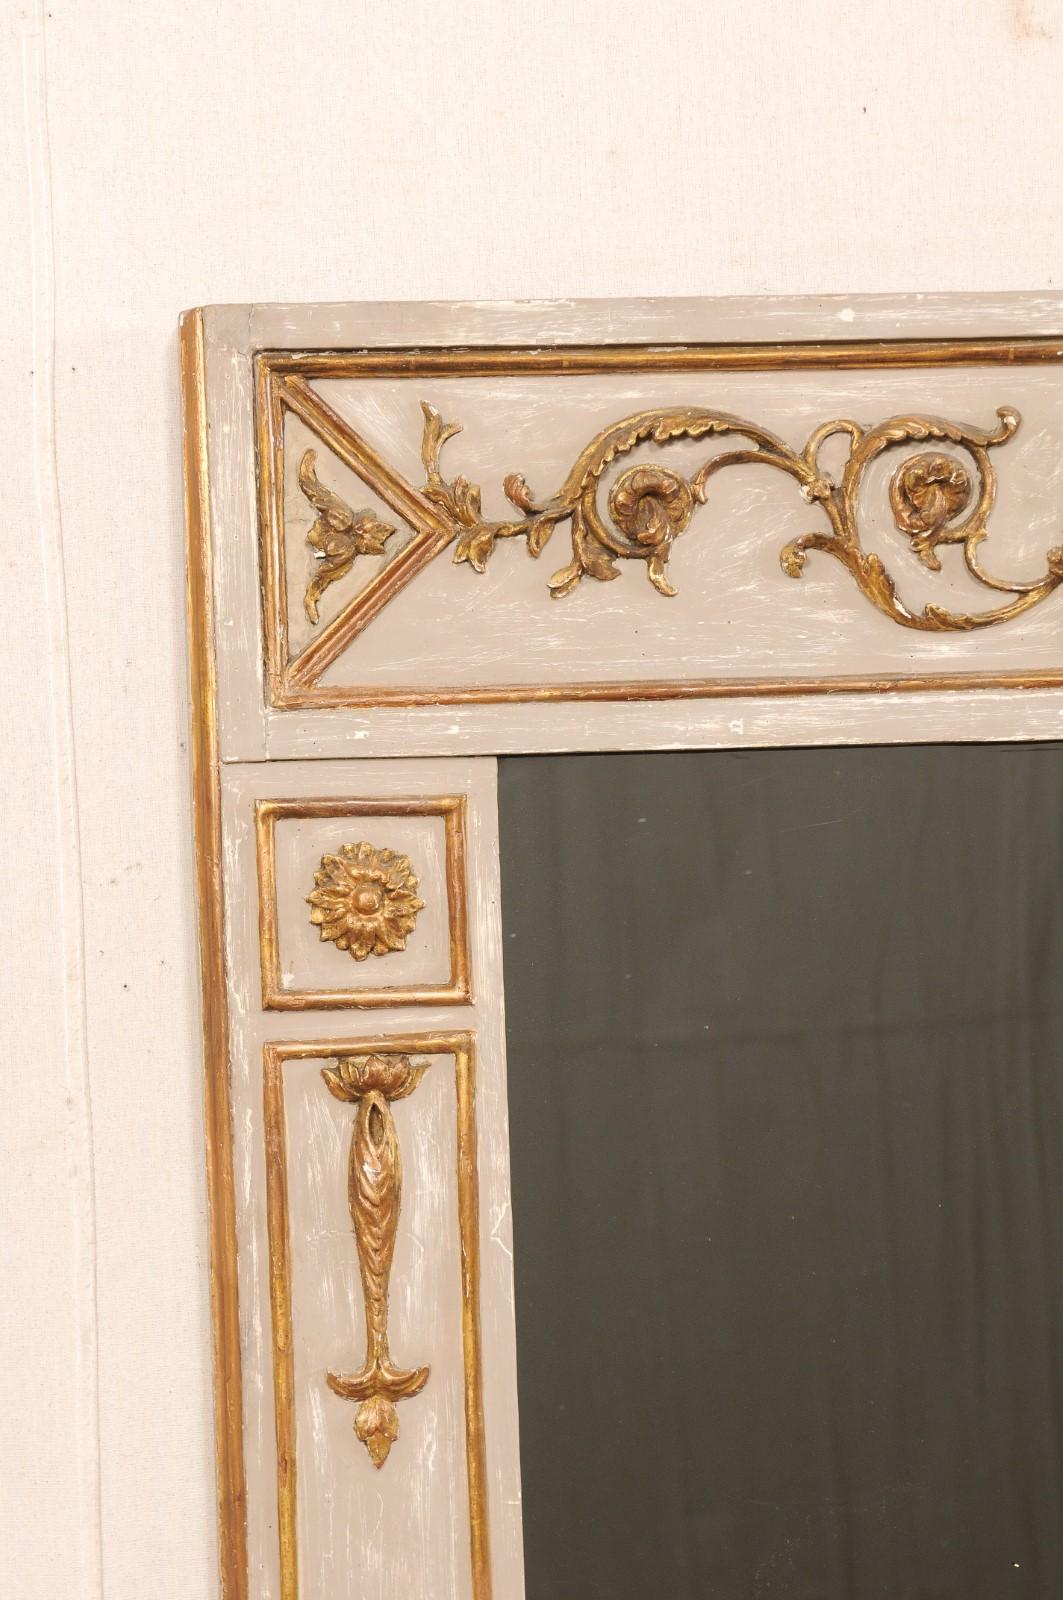 Italian Neoclassic Carved & Gilt Overmantel Mirror 'with Dark Tint' 19th Century For Sale 1